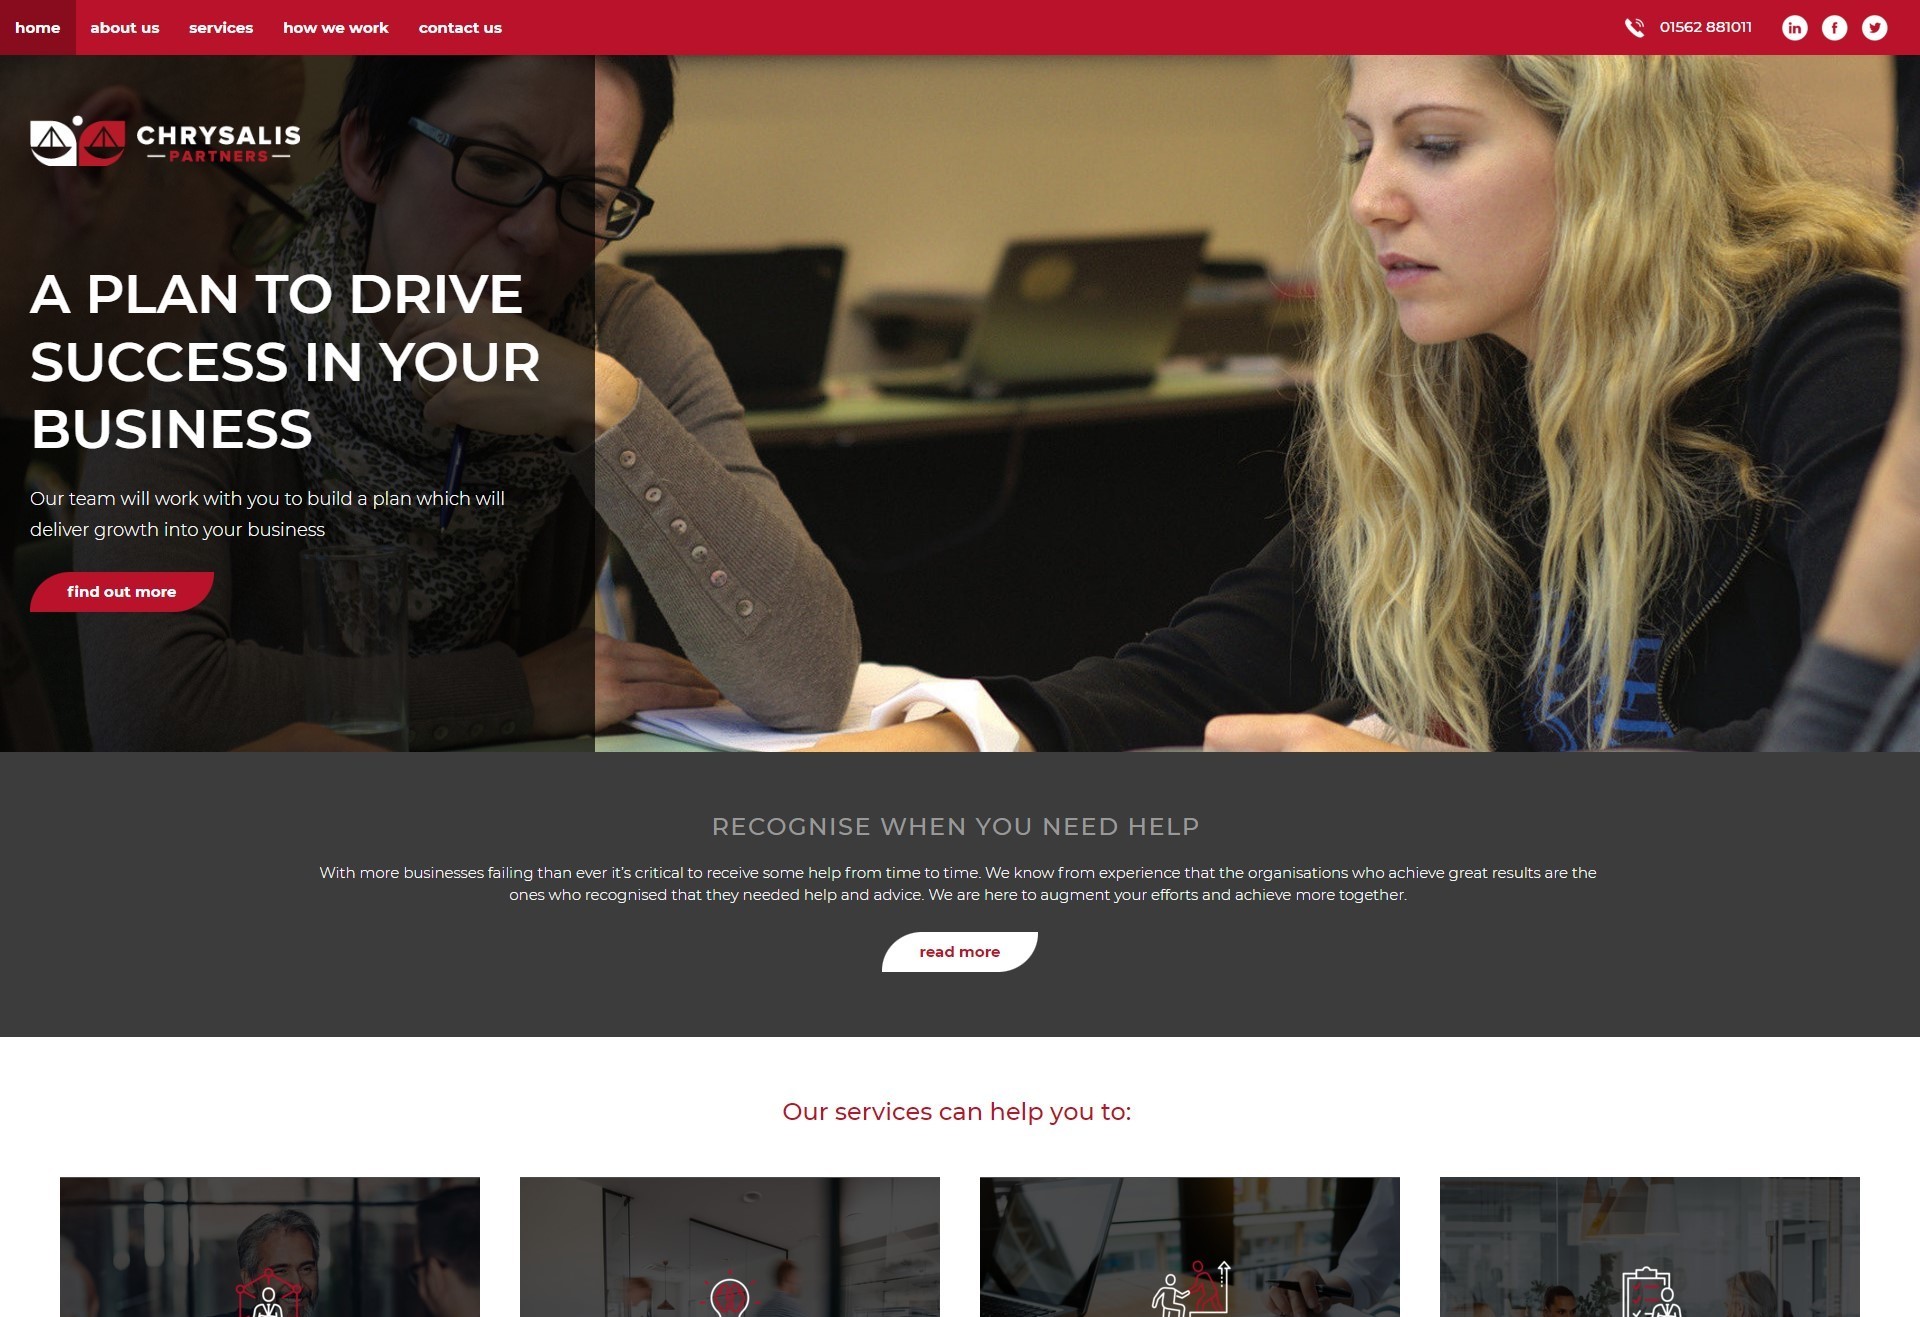 A business growth coach responsive web design with accents of red shown on a desktop.